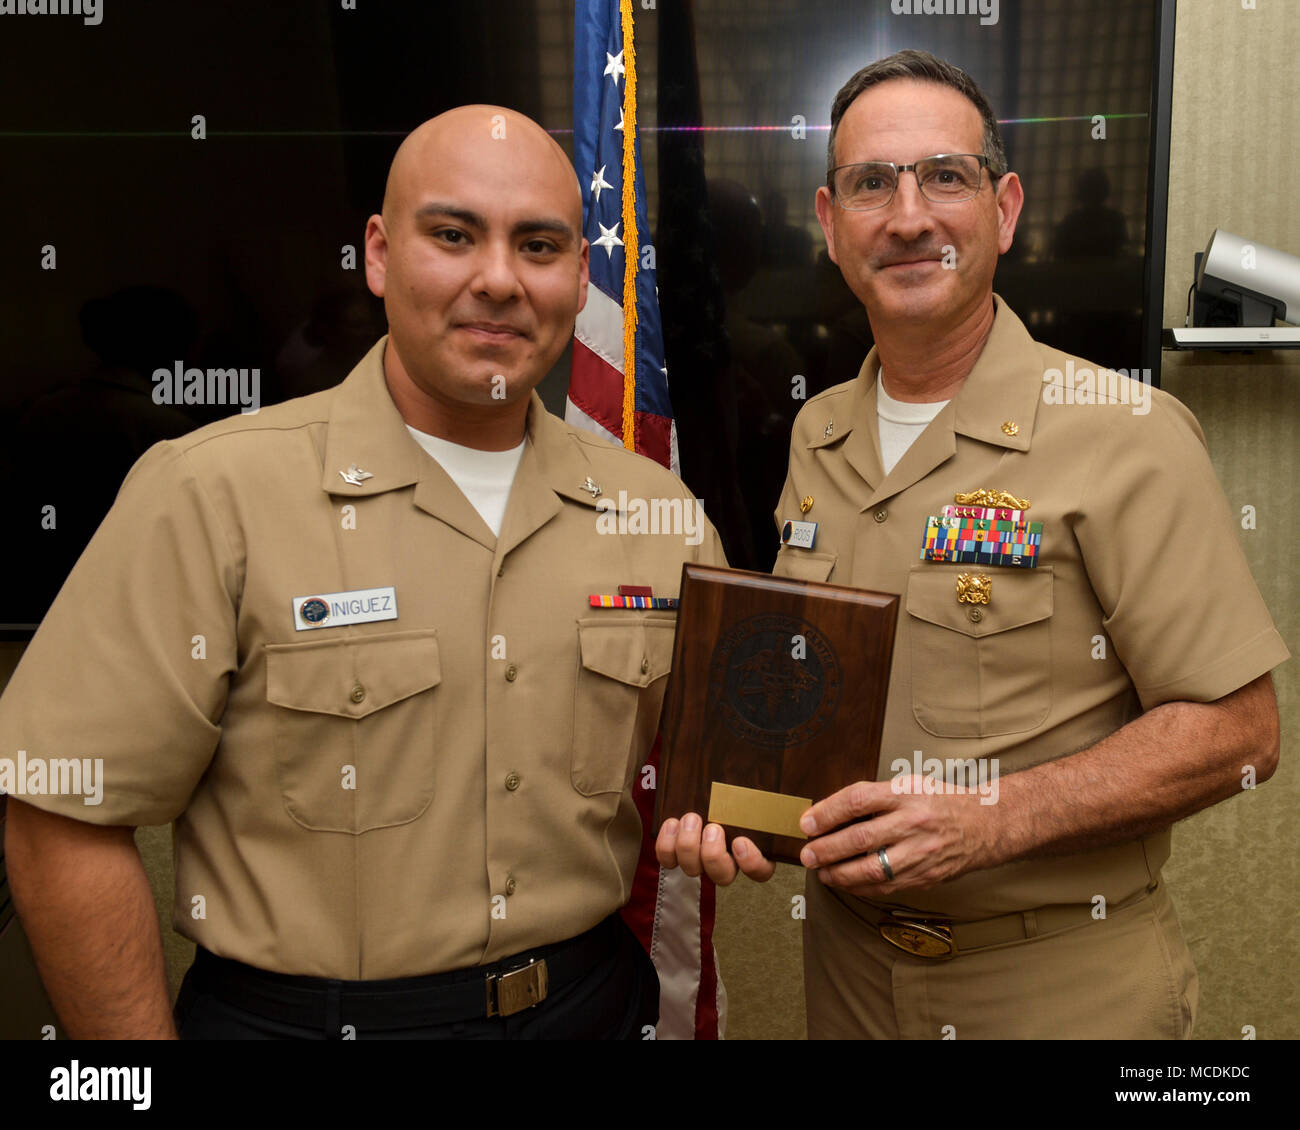 180216-N-PN275-1013 SAN DIEGO (Feb. 16, 2018) CAPT. Joel Roos, Naval Medical Center San Diego Commanding Officer,  presents Hospital Corpsman 3rd Class Class Armando Iniguez with the Junior Sailor of the Quarter award. Hospital Corpsman 3rd Class Iniguez received the award for his exceptional work and devotion to duty. (U.S. Navy Photo by Mass Communication Specialist 2nd Class Zachary Kreitzer) Stock Photo